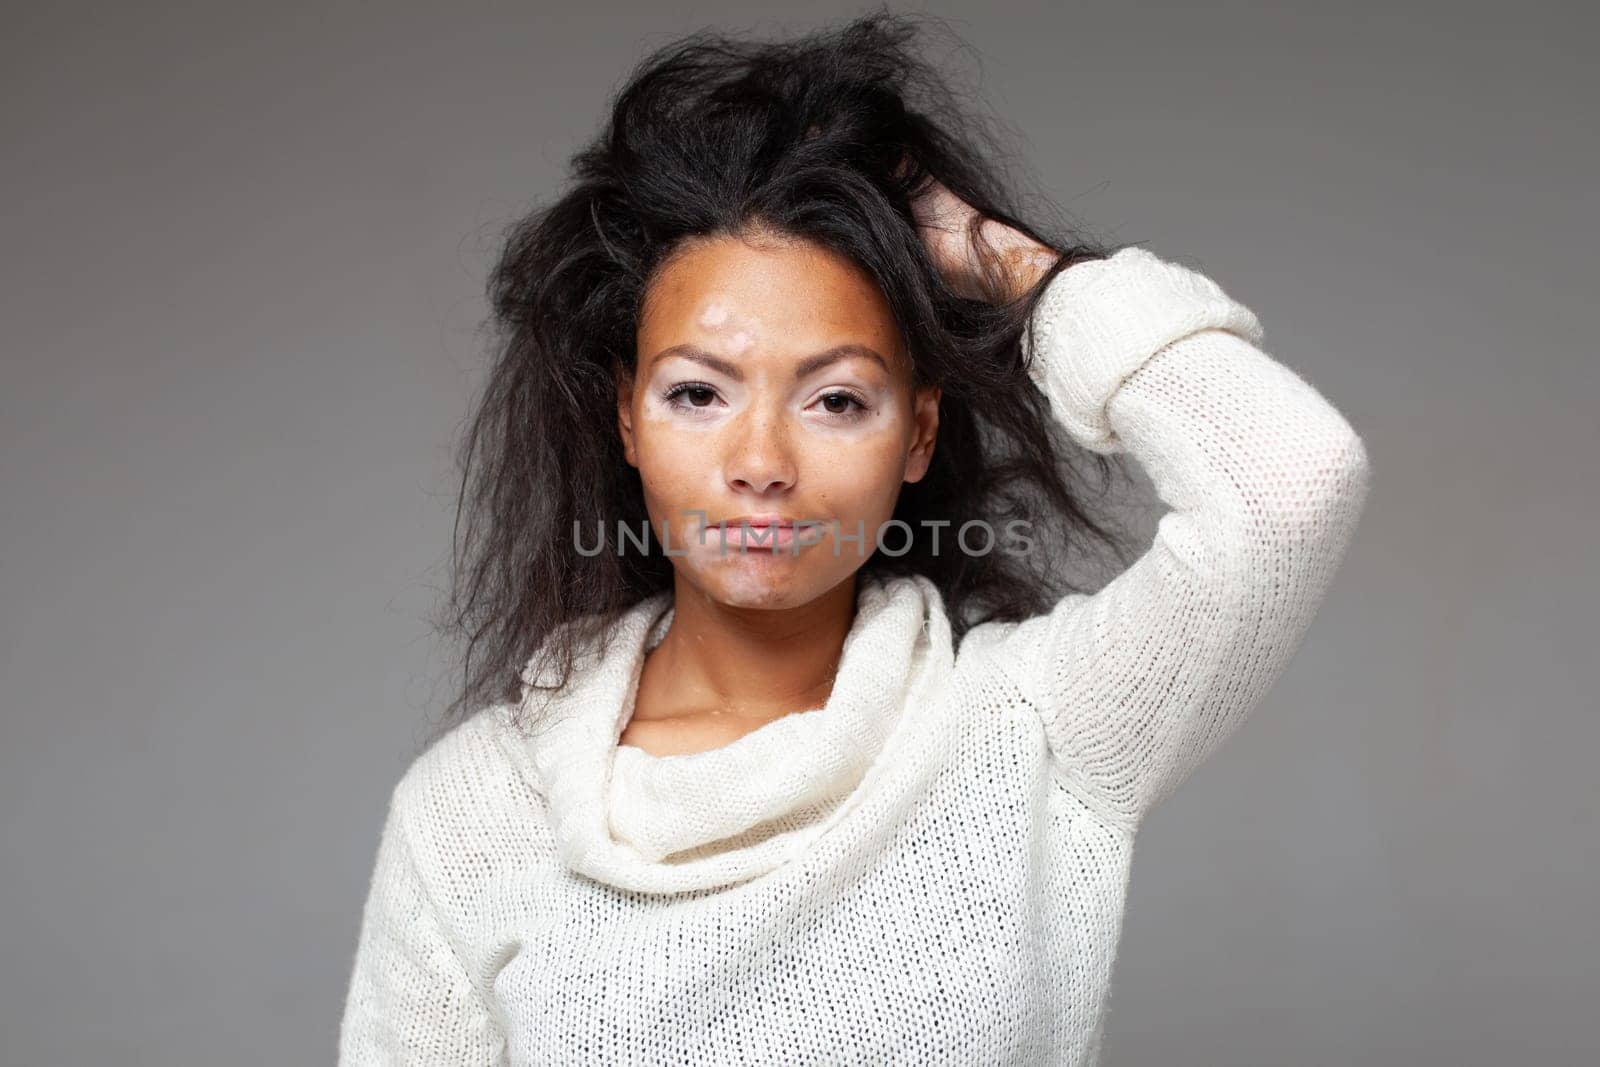 Confident black woman with Vitiligo disease looking at camera. Portrait of African American lady with hand in hair standing against gray background. Girl with pigmentation skin problem.